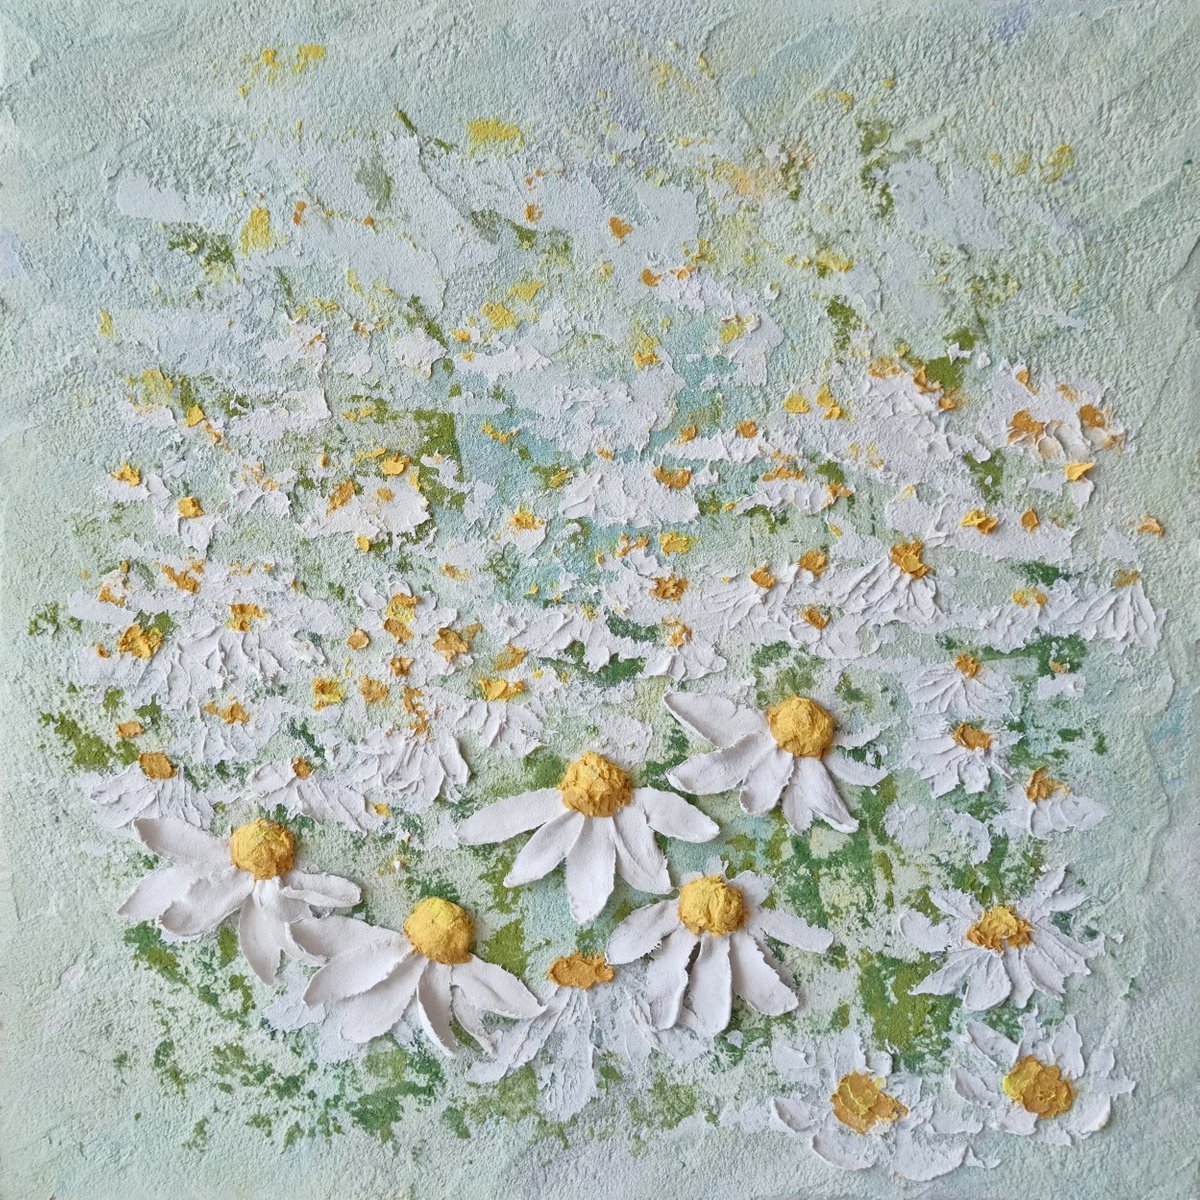 Chamomile happiness 2. Light relief landscape with white flowers. Summer blooming by Irina Stepanova